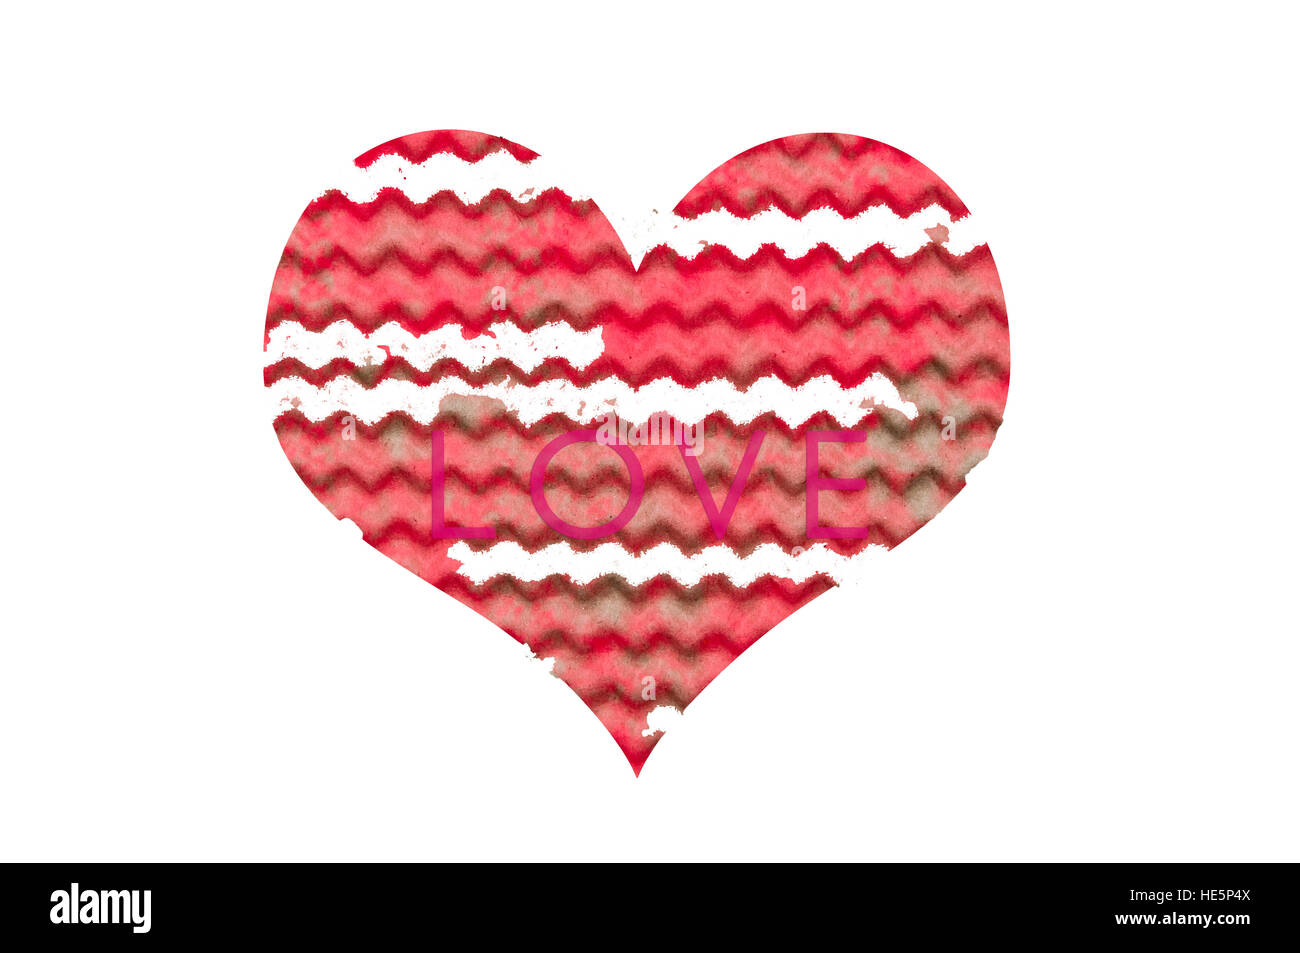 Valentines day heart. Love Heart shape on natural background Stock Photo